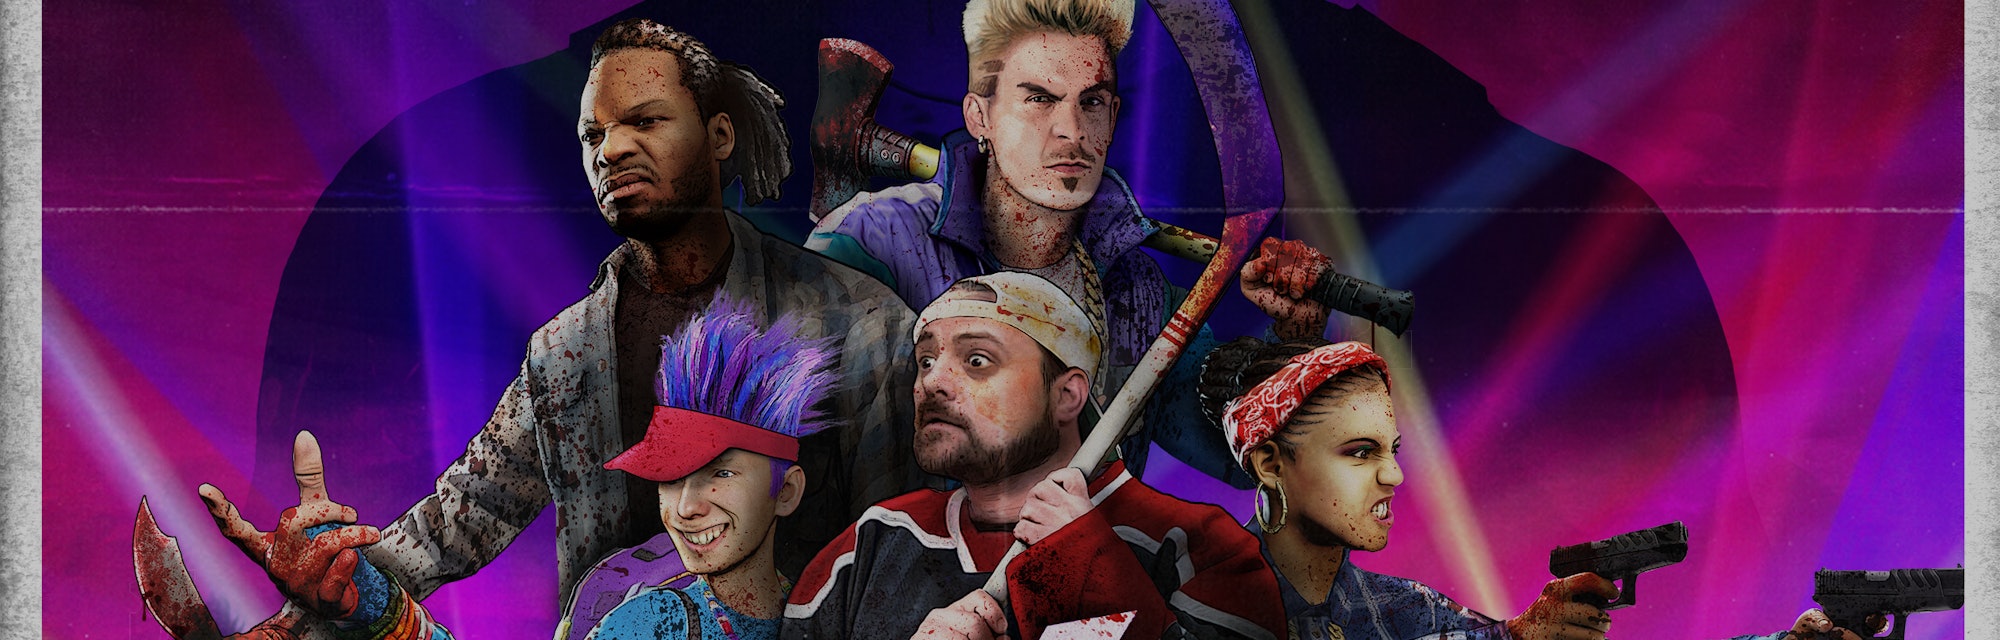 Kevin Smith S A Playable Character In Call Of Duty Zombies